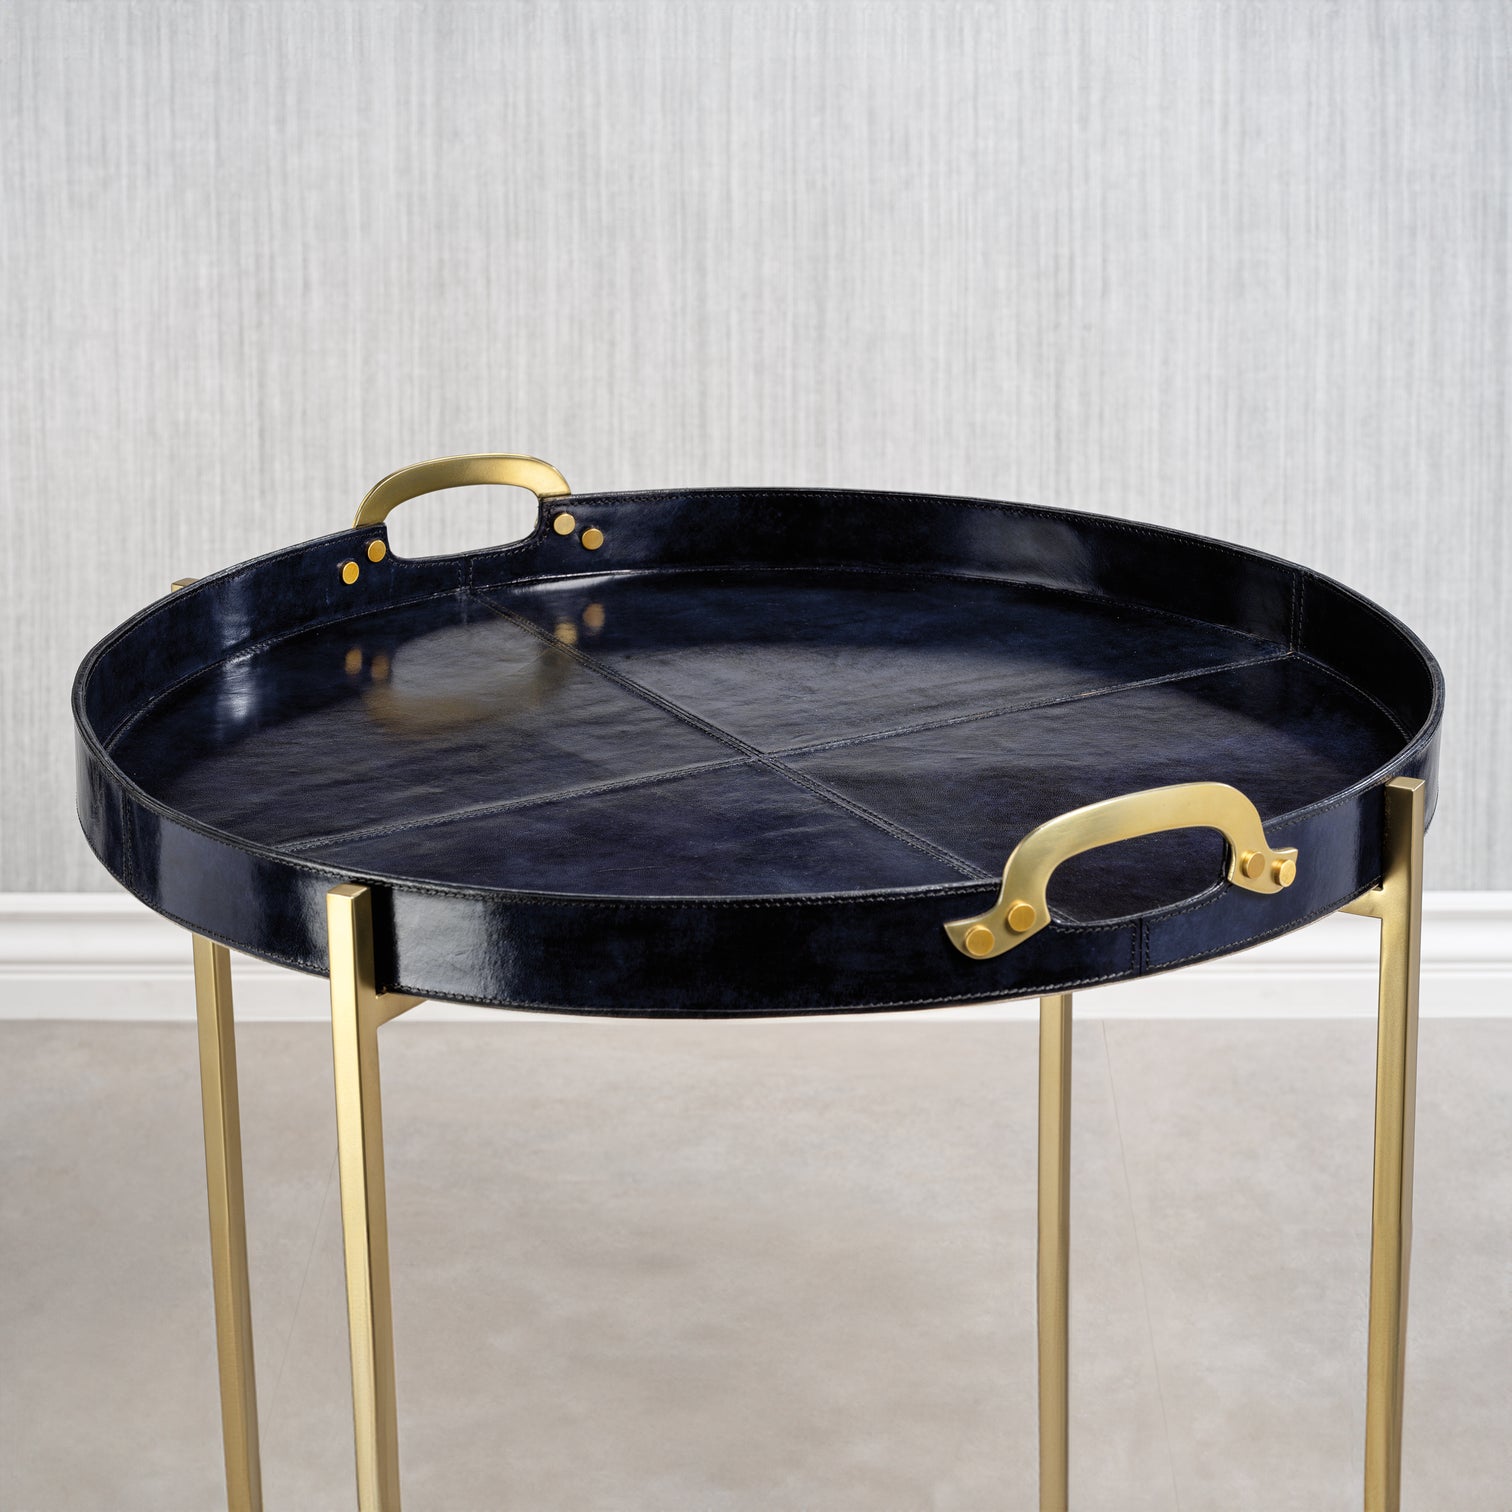 Savoy Leather w/ Brass Handles Round Tray on Stand - Blue and Gold